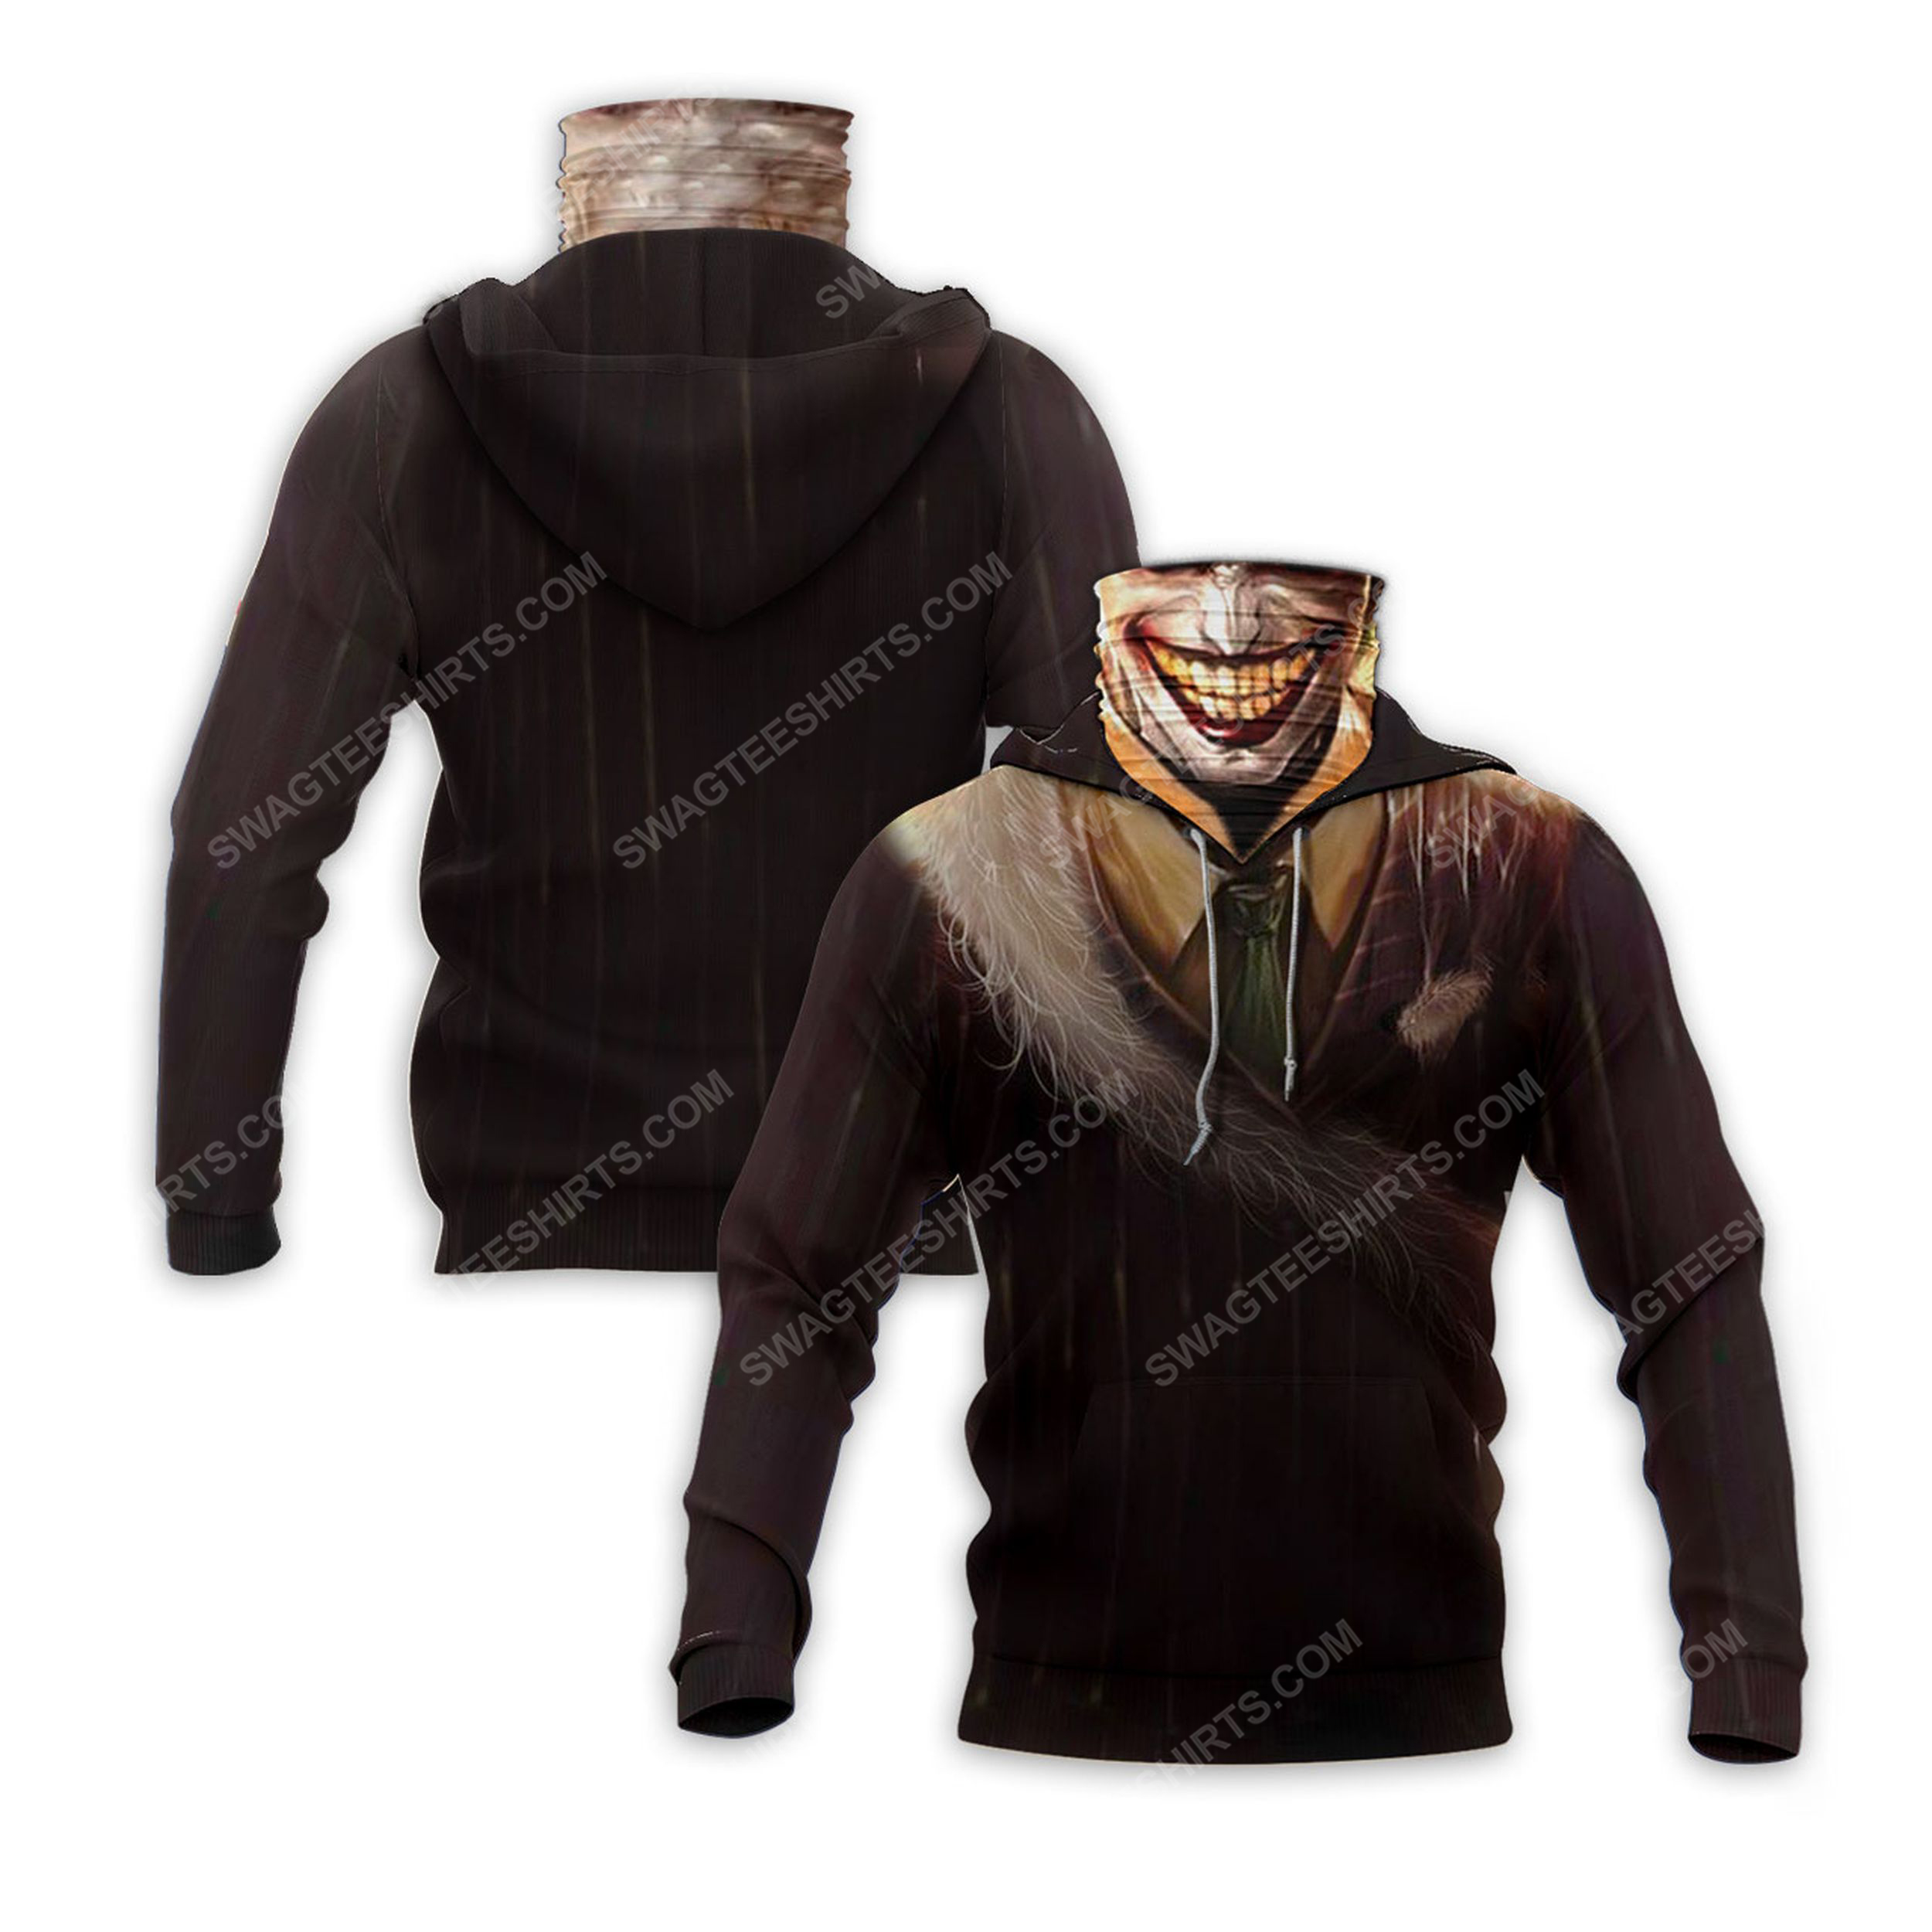 [special edition] The joker’s smile full print mask hoodie – maria